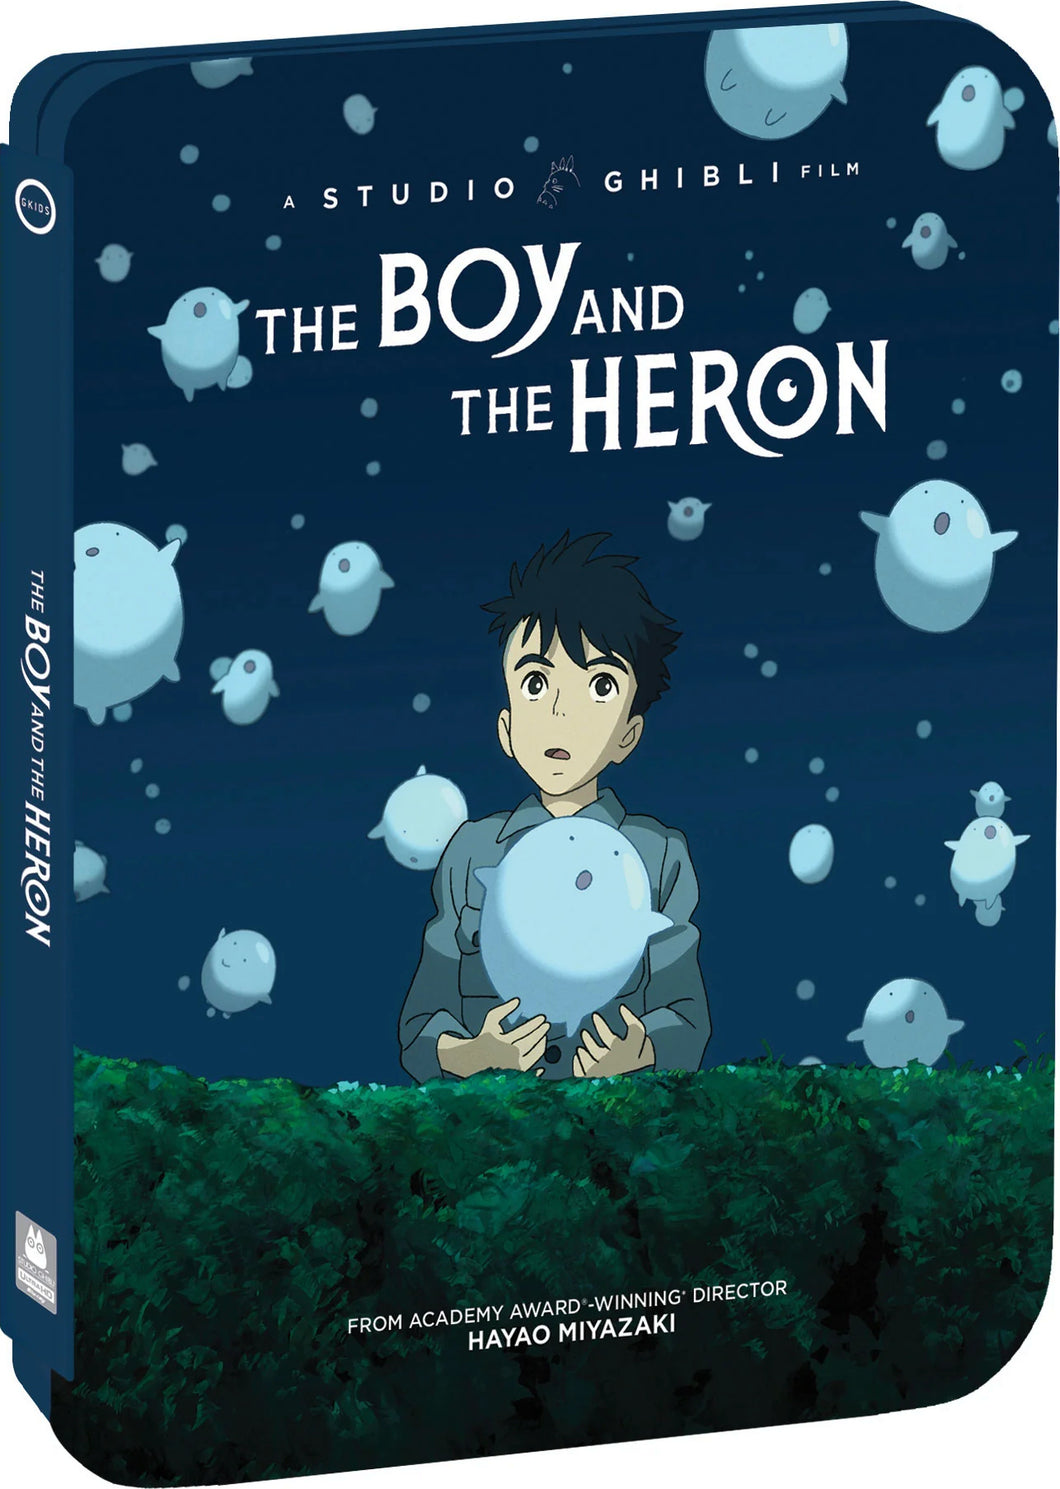 The Boy and the Heron 4K Steelbook - front cover